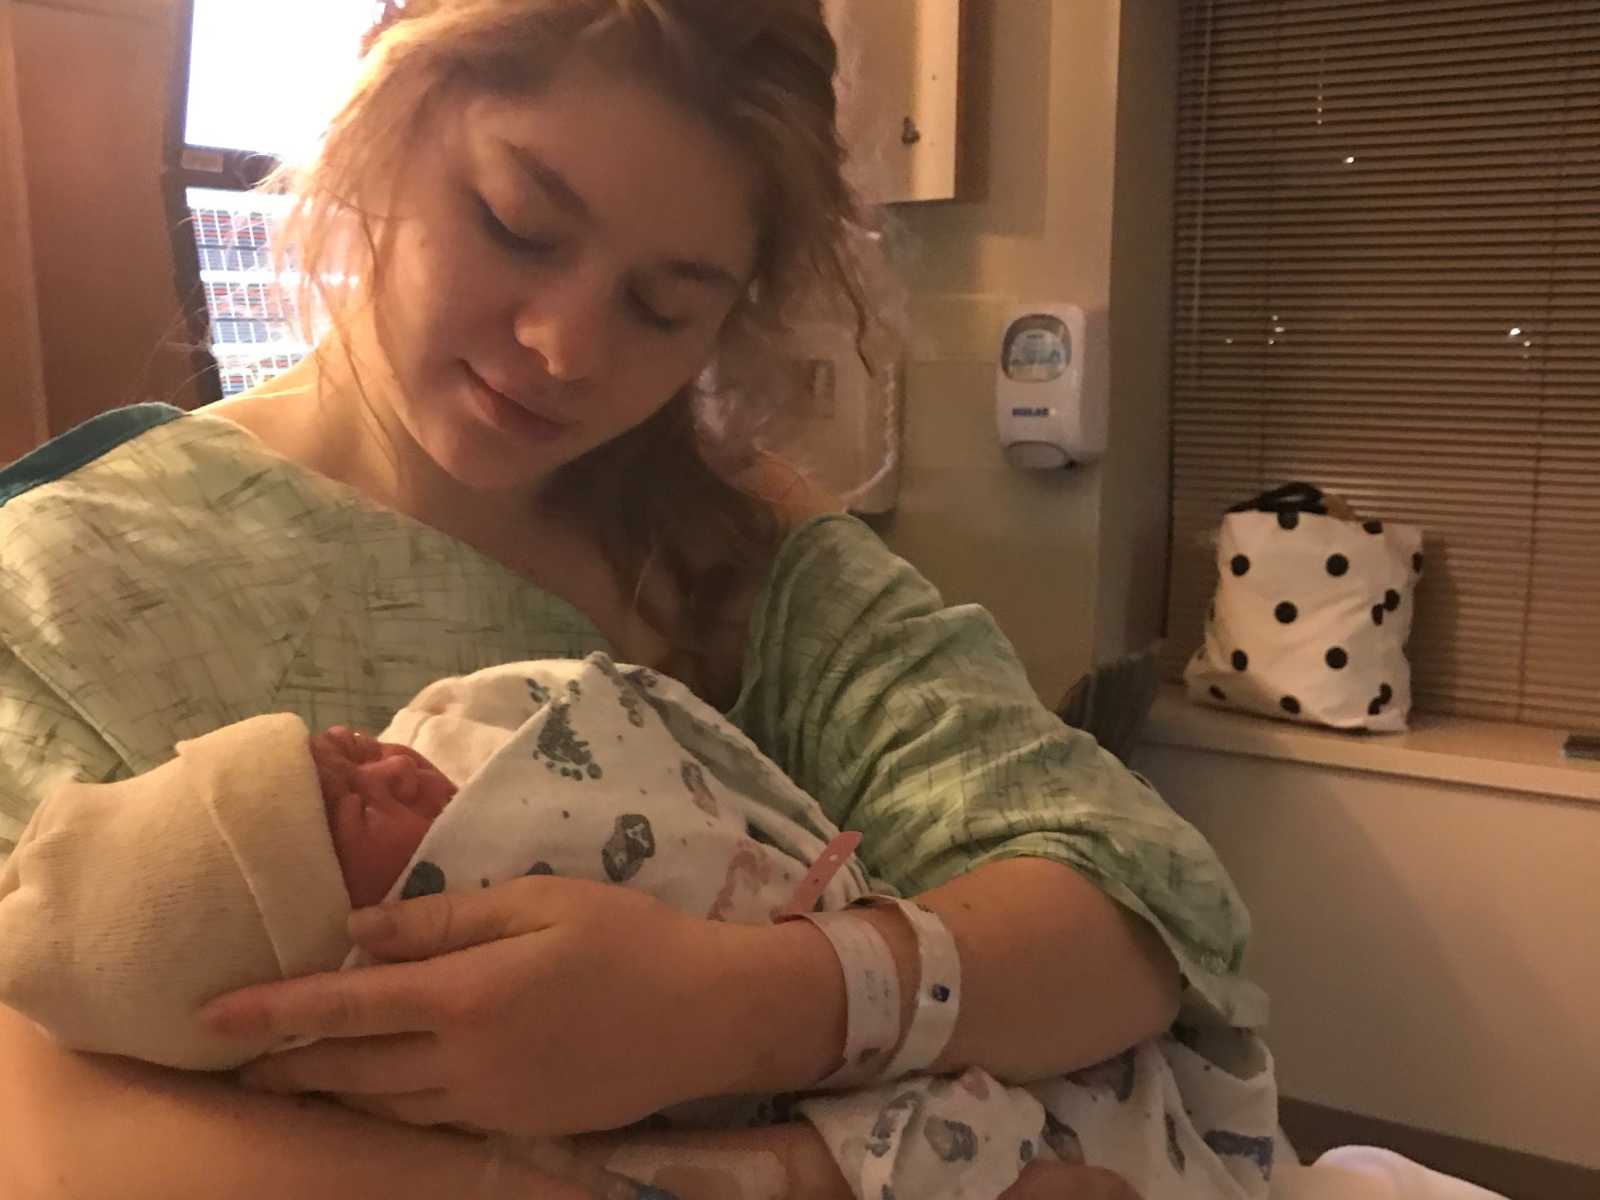 mother holds newborn baby in hospital gown